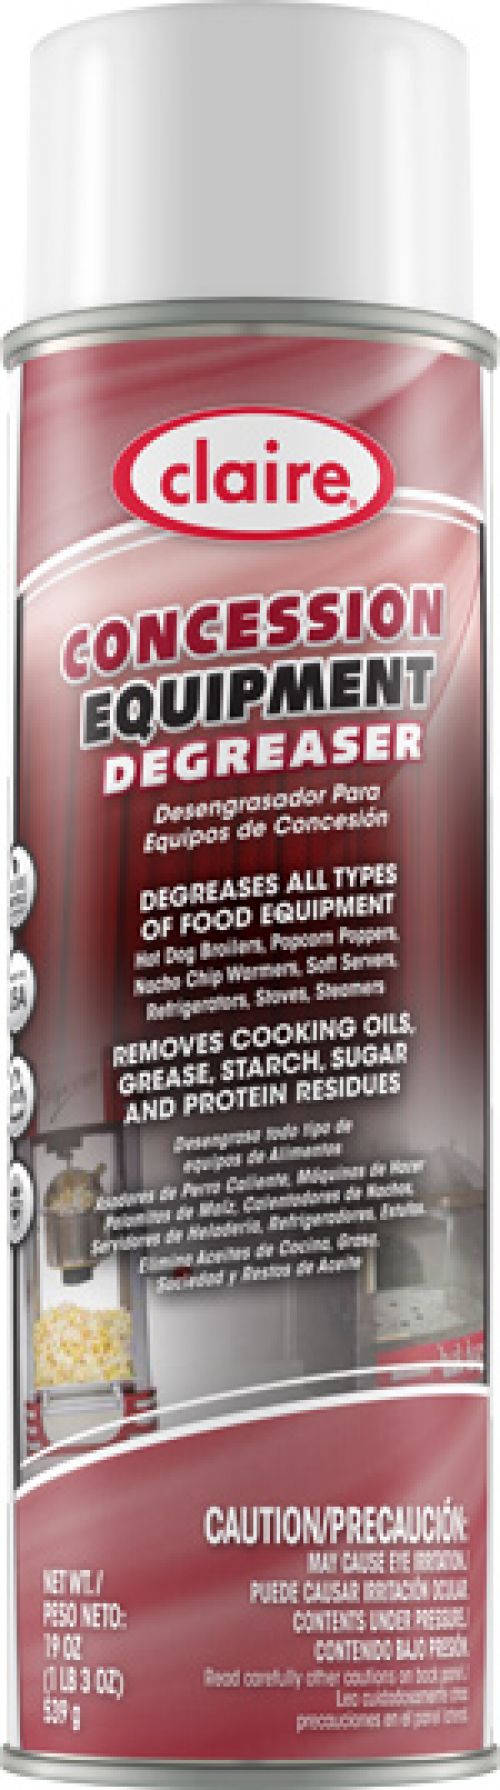 CONCESSION CLEANER 19OZ.